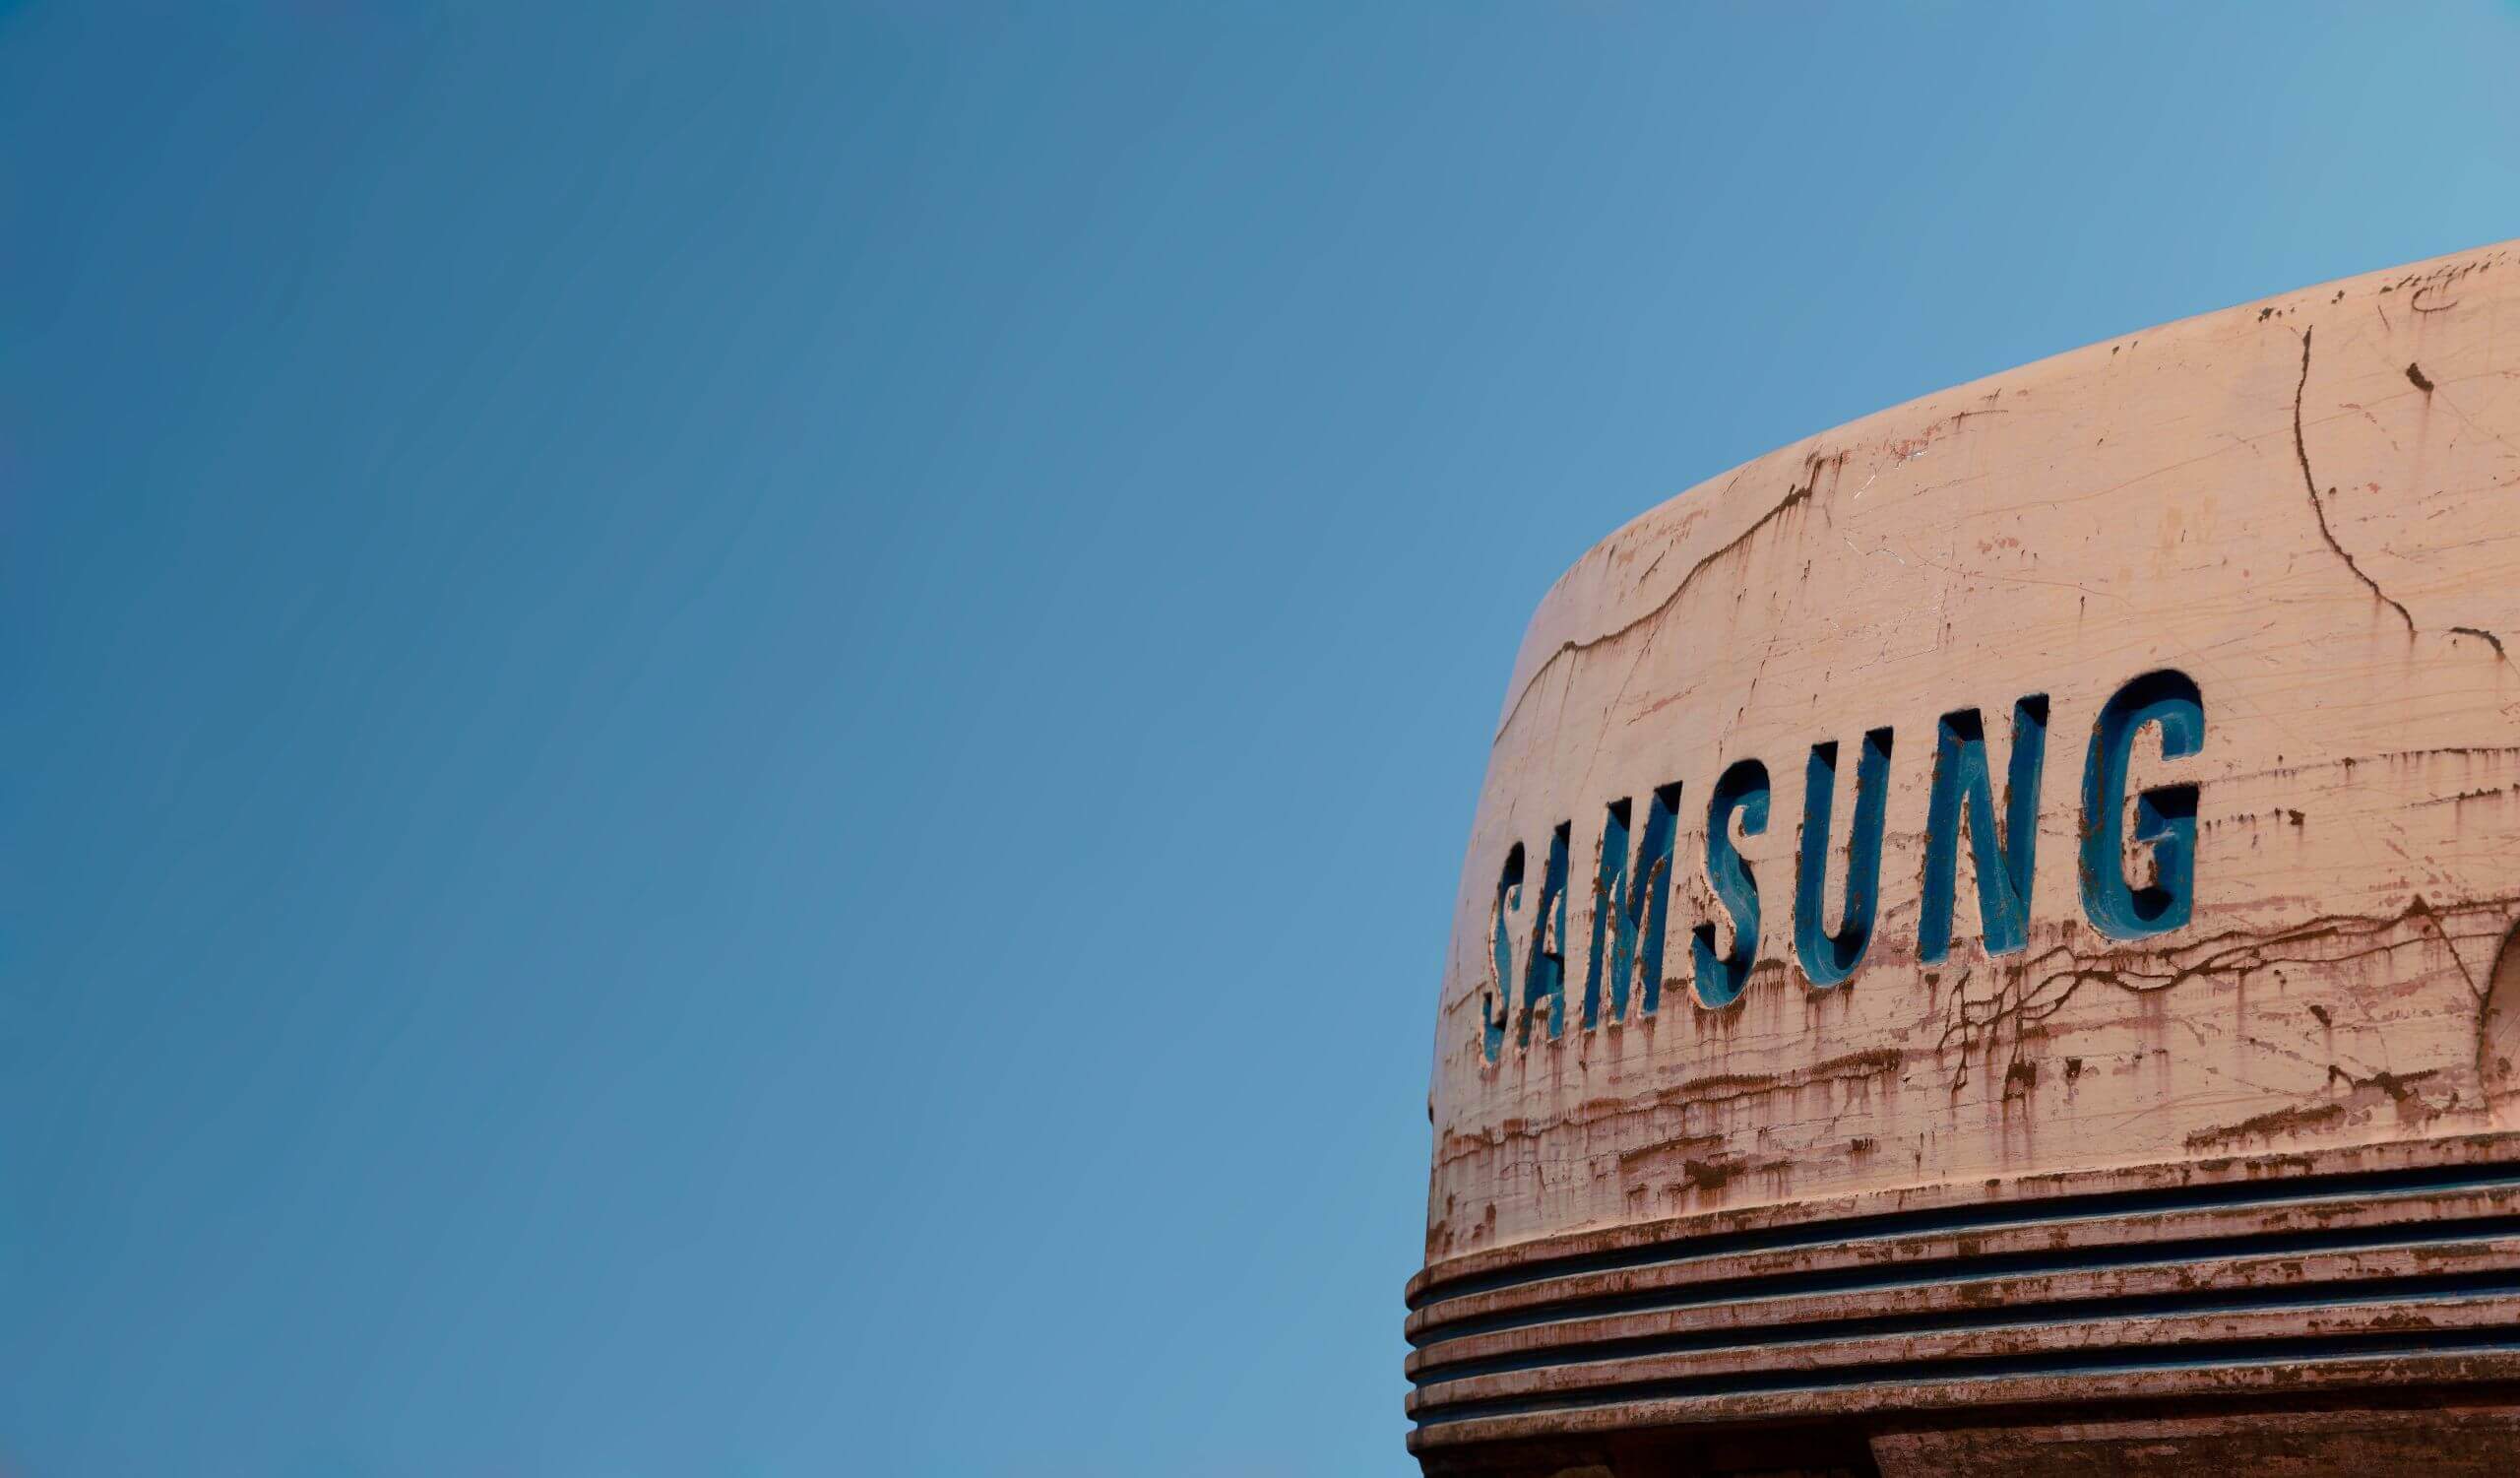 Samsung is pouring $8 billion towards new NAND factory in China